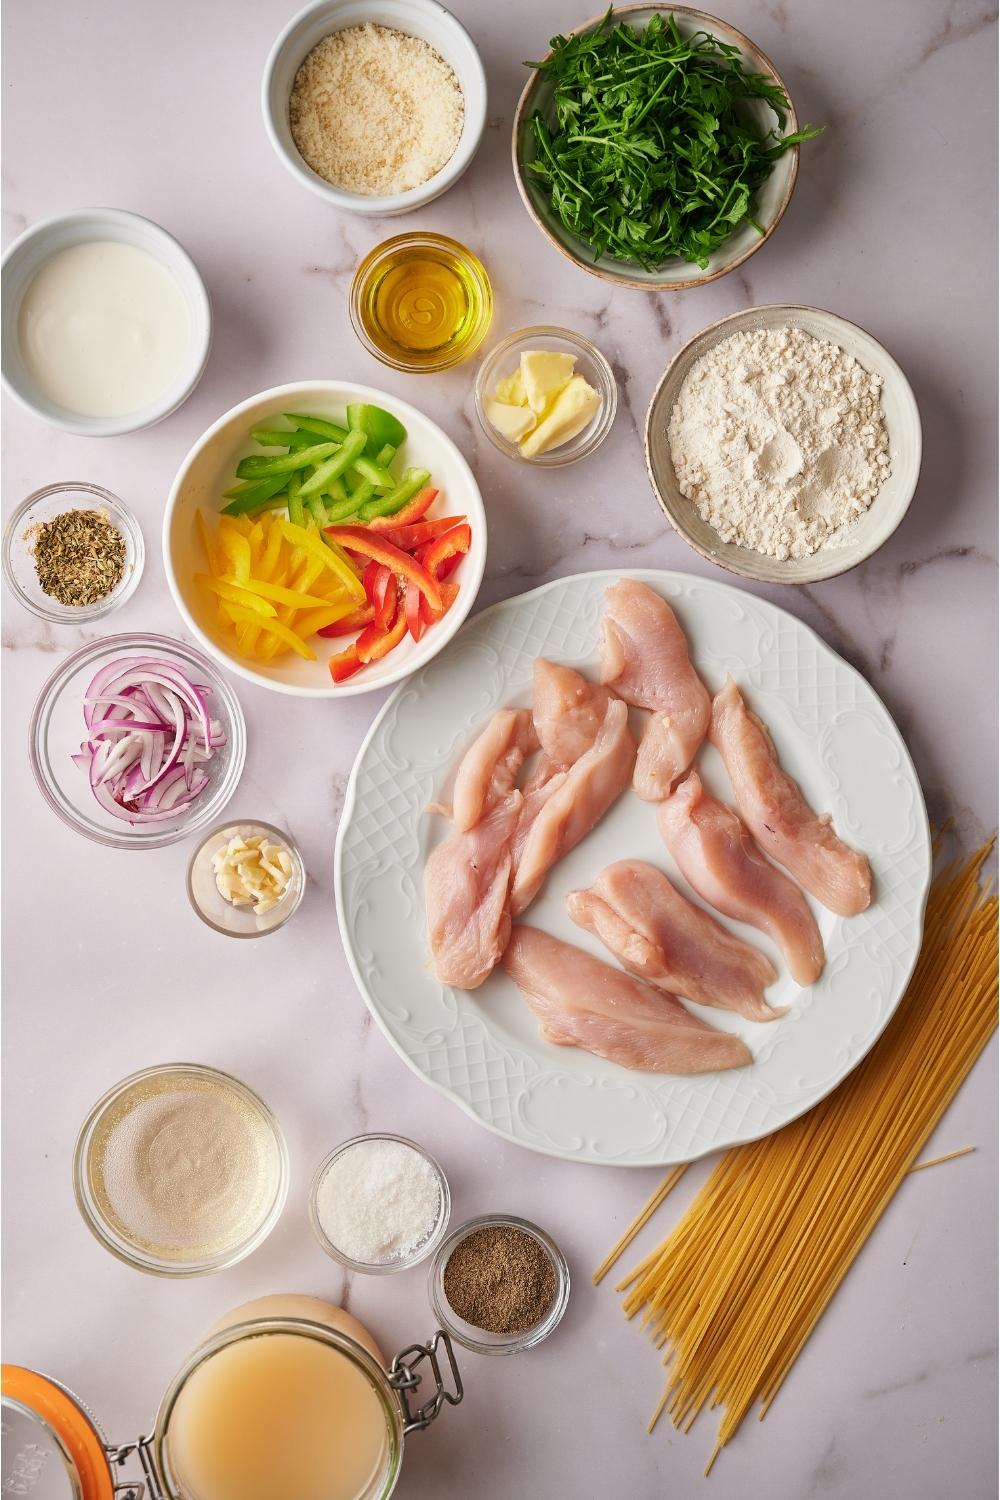 An assortment of ingredients including plates and bowls of raw chicken, flour and seasoning mixture, sliced bell peppers, sliced red onion, oil, butter, cheese, salt, pepper, parsley, and white wine, with raw pasta on the counter.